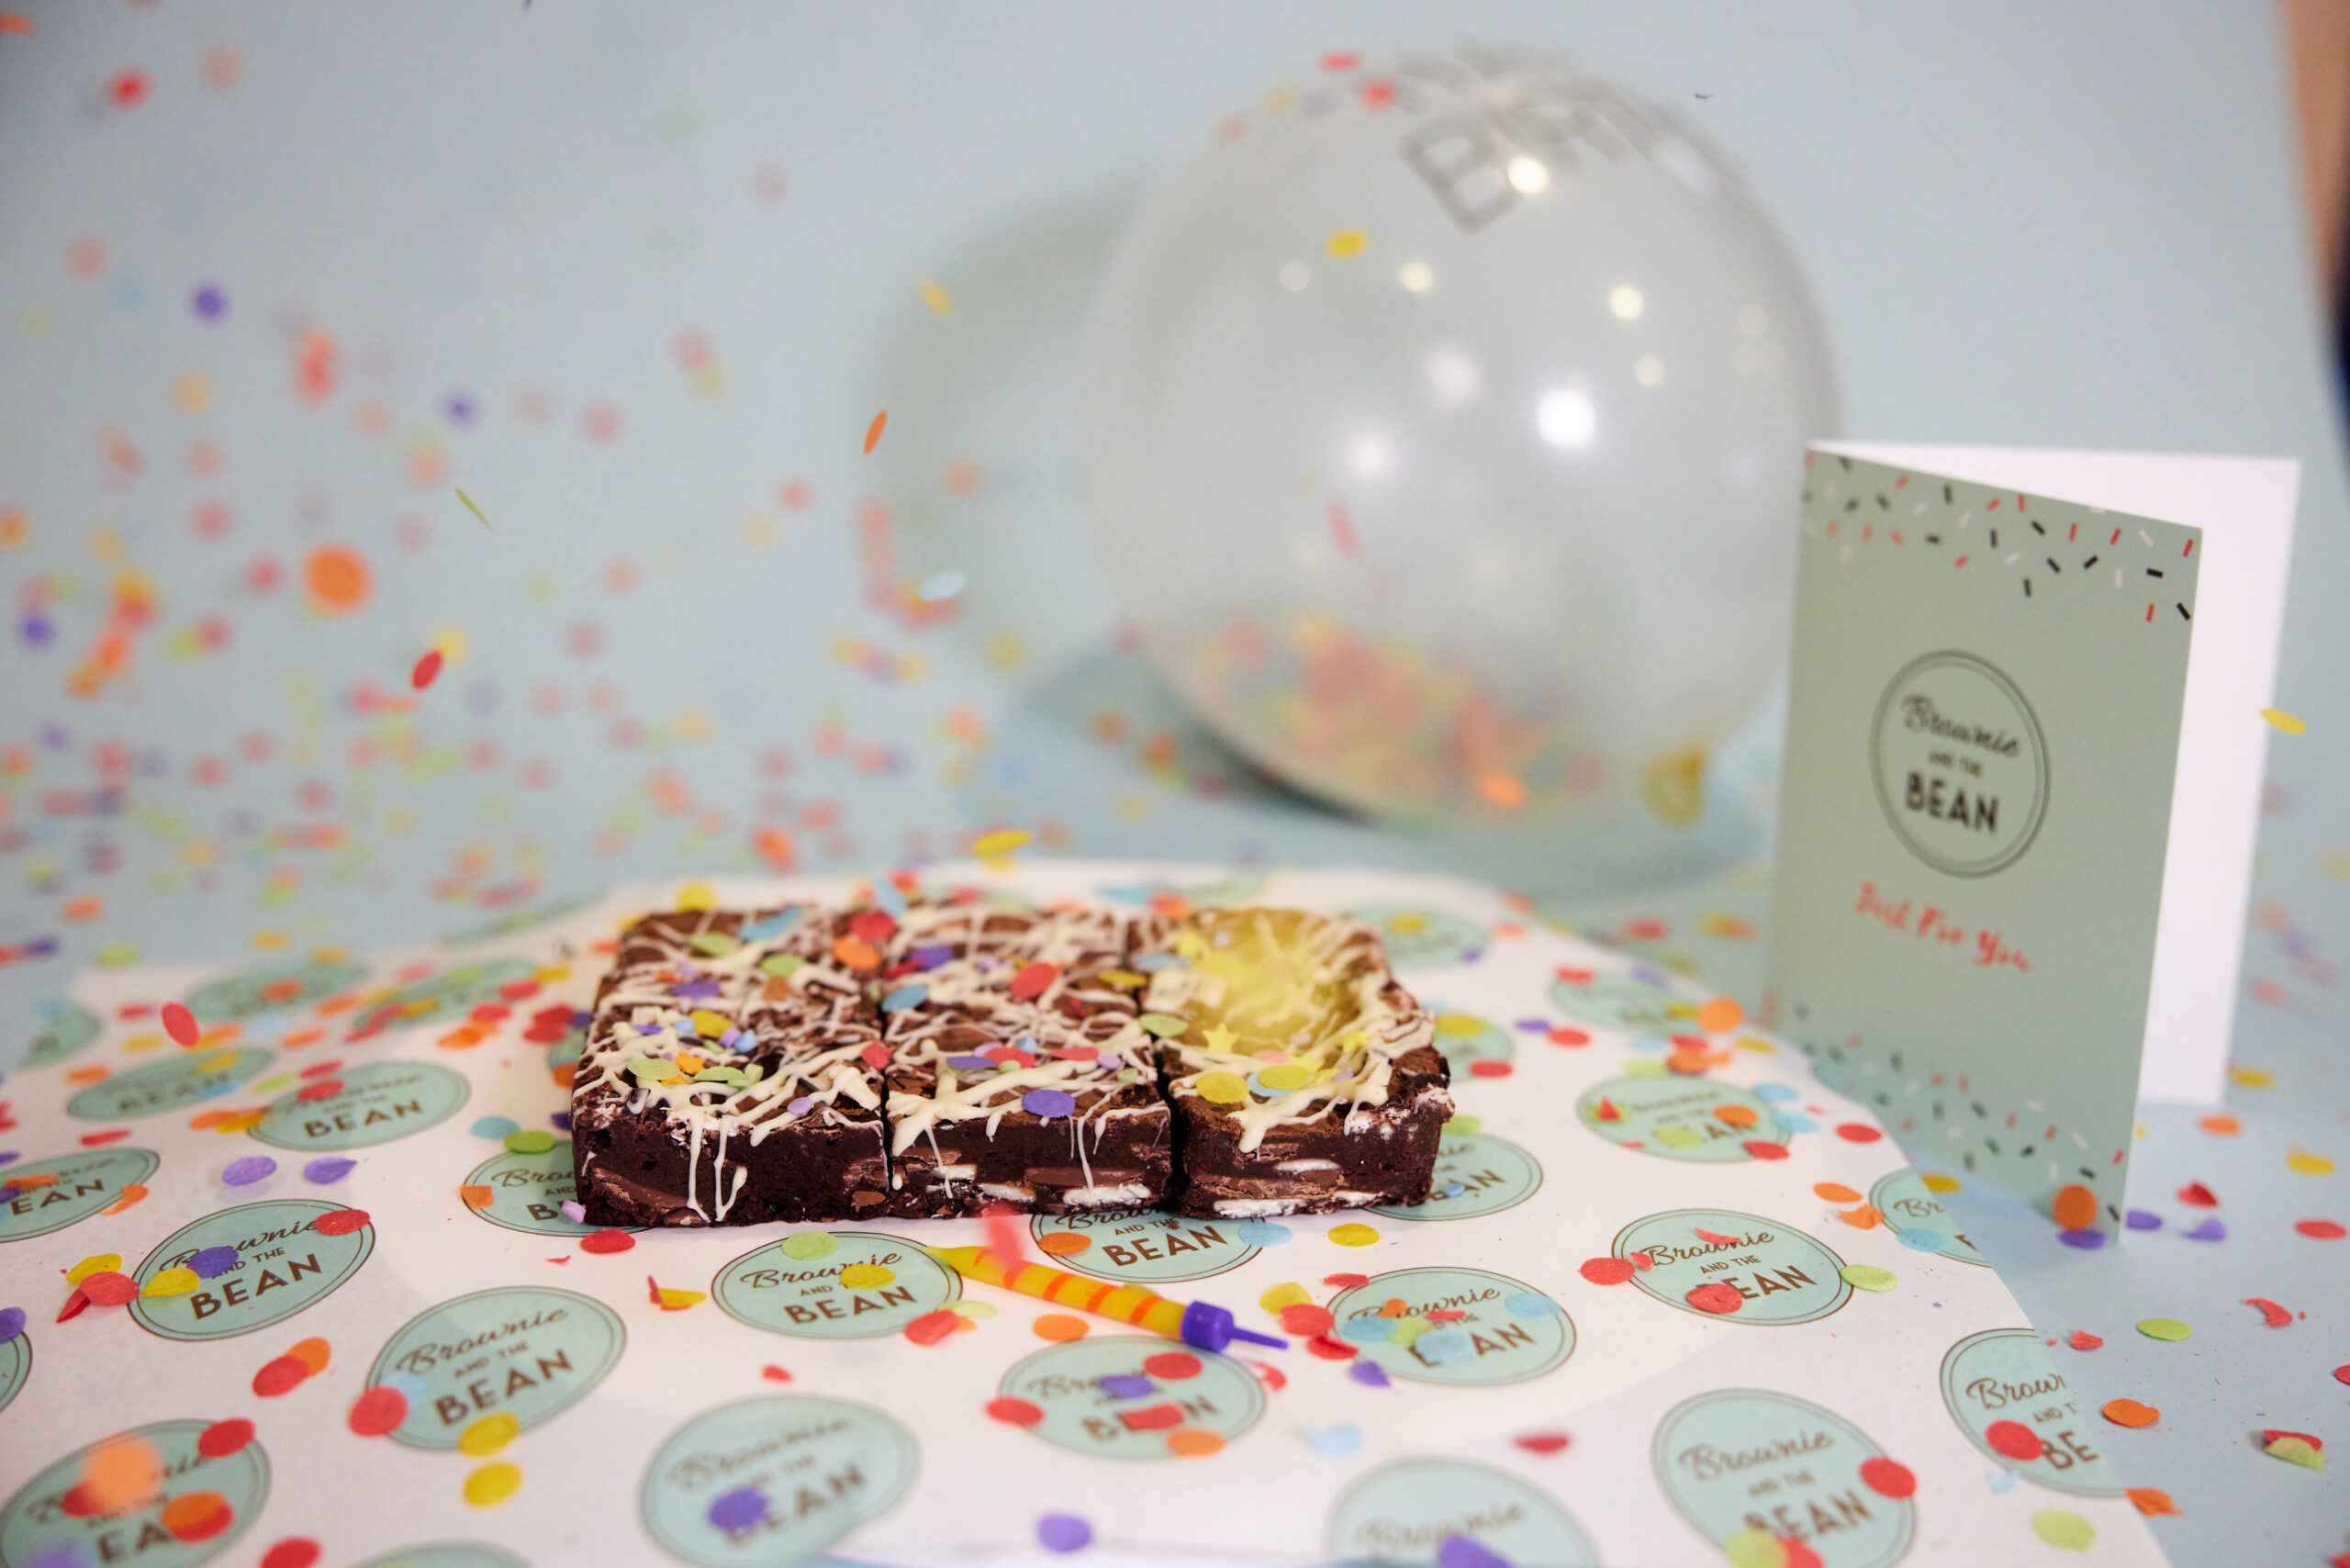 A scene of birthday brownies on branded Brownie and the Bean greaseproof paper, a ballon, a branded Brownie and the Bean card and bright coloured confetti flying in the air.